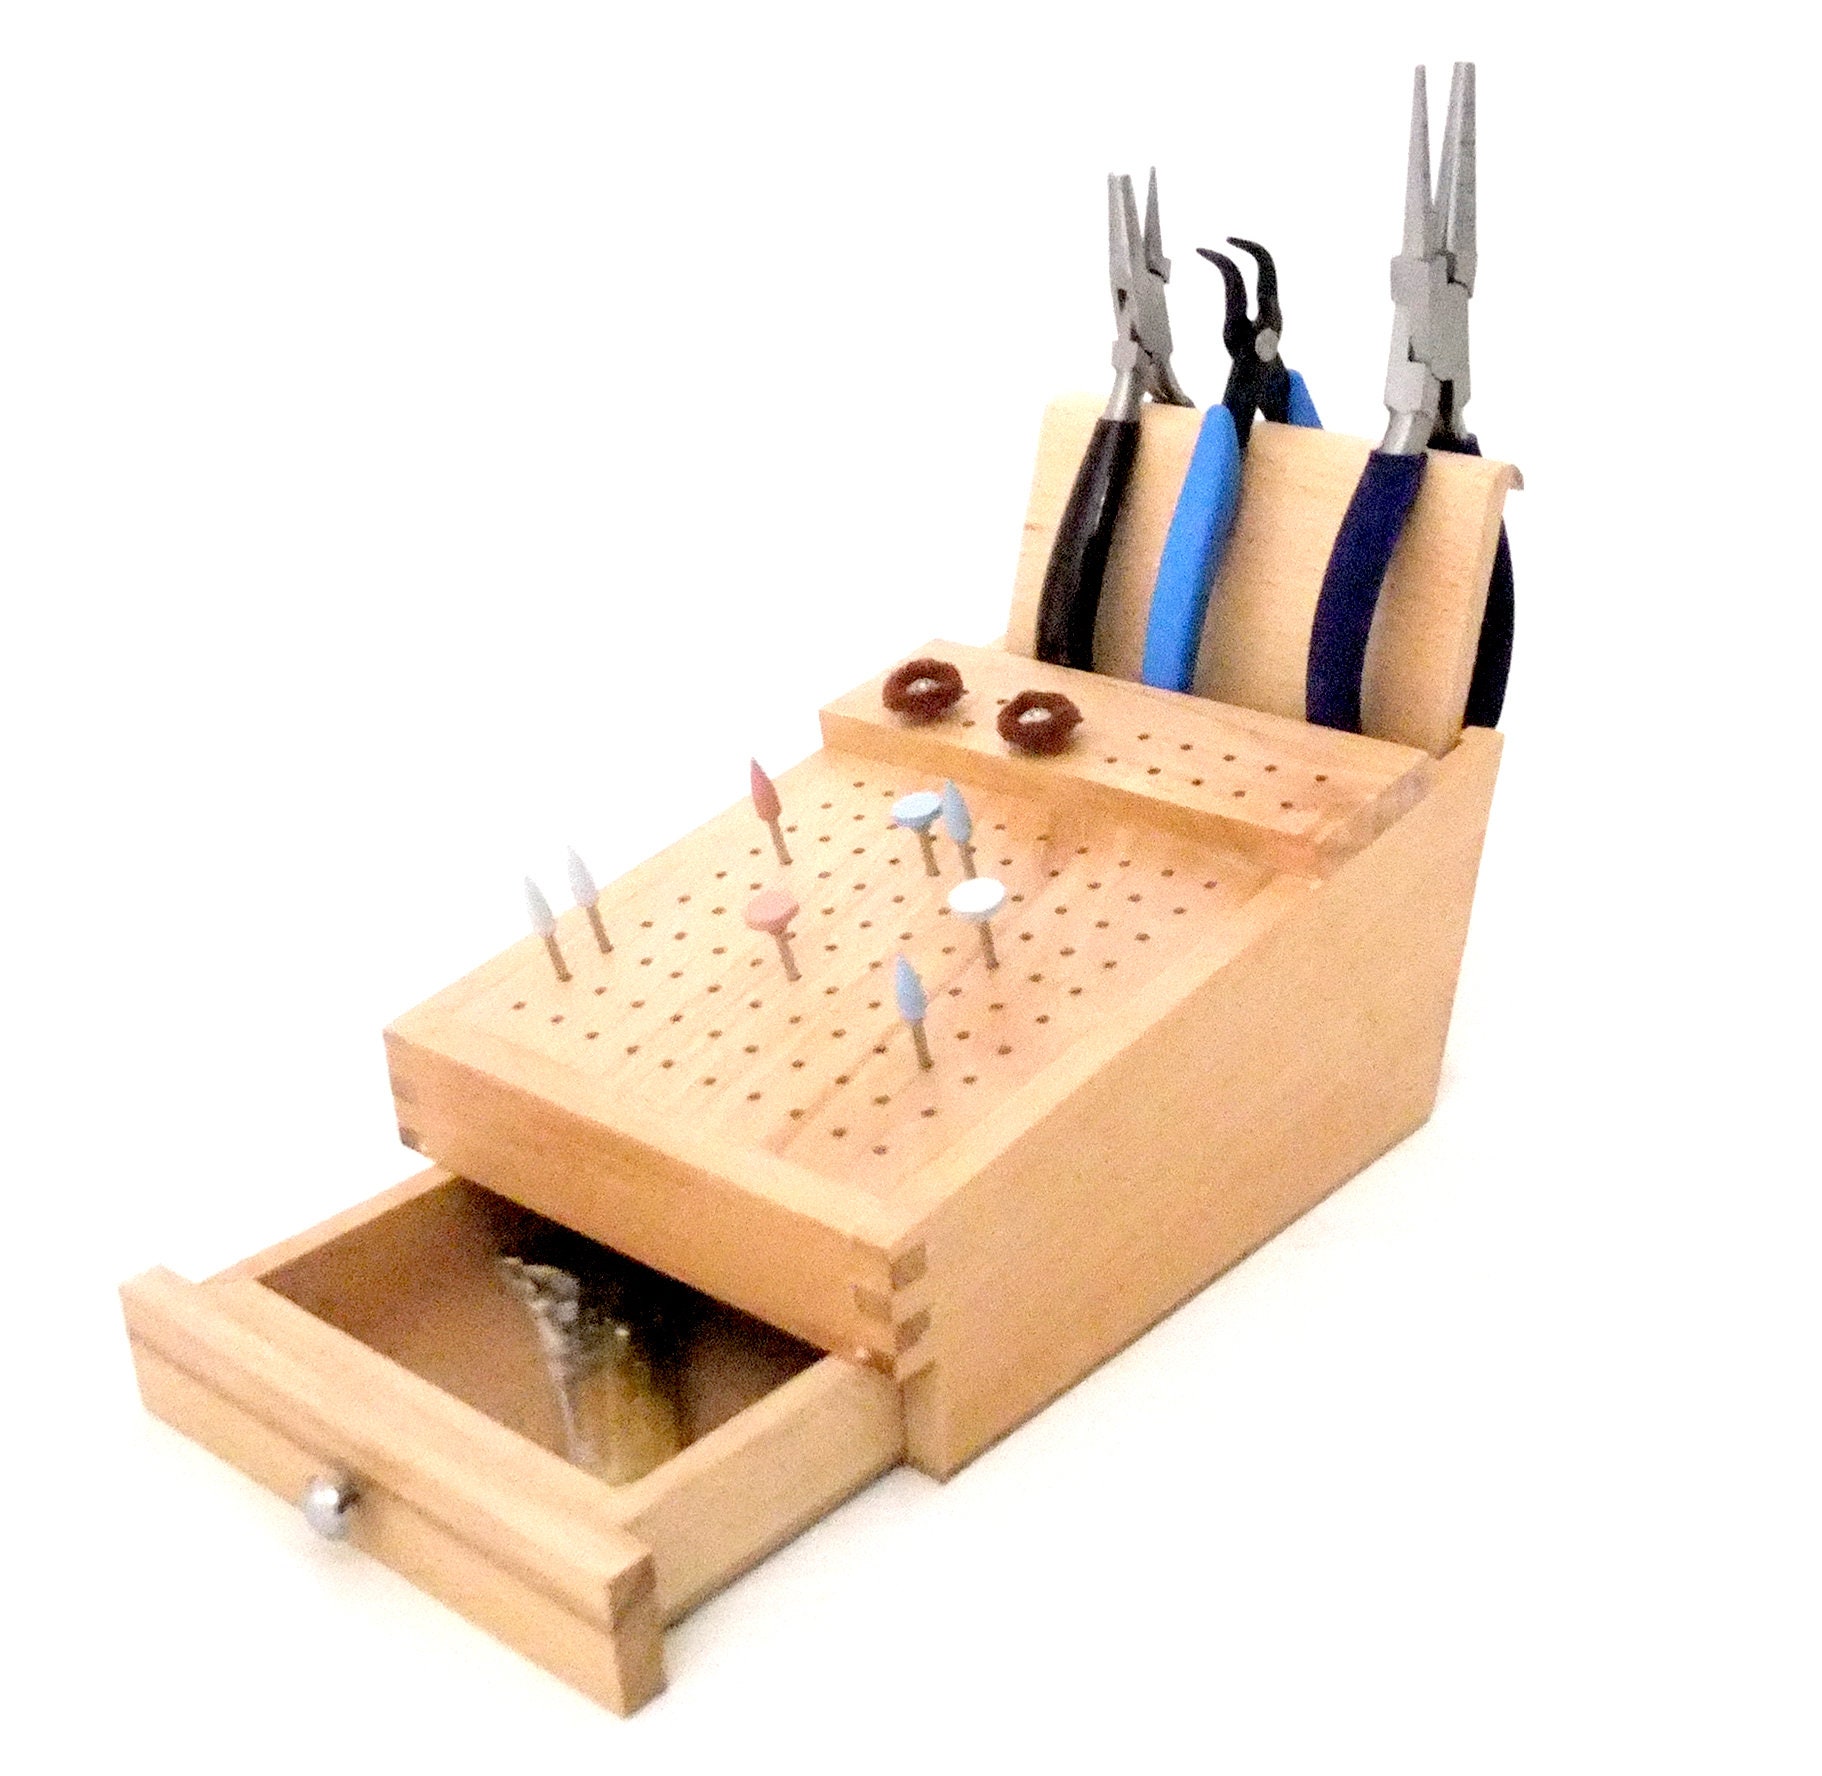 bro they wanted $30 bucks for a pliers organizer.. : r/Tools